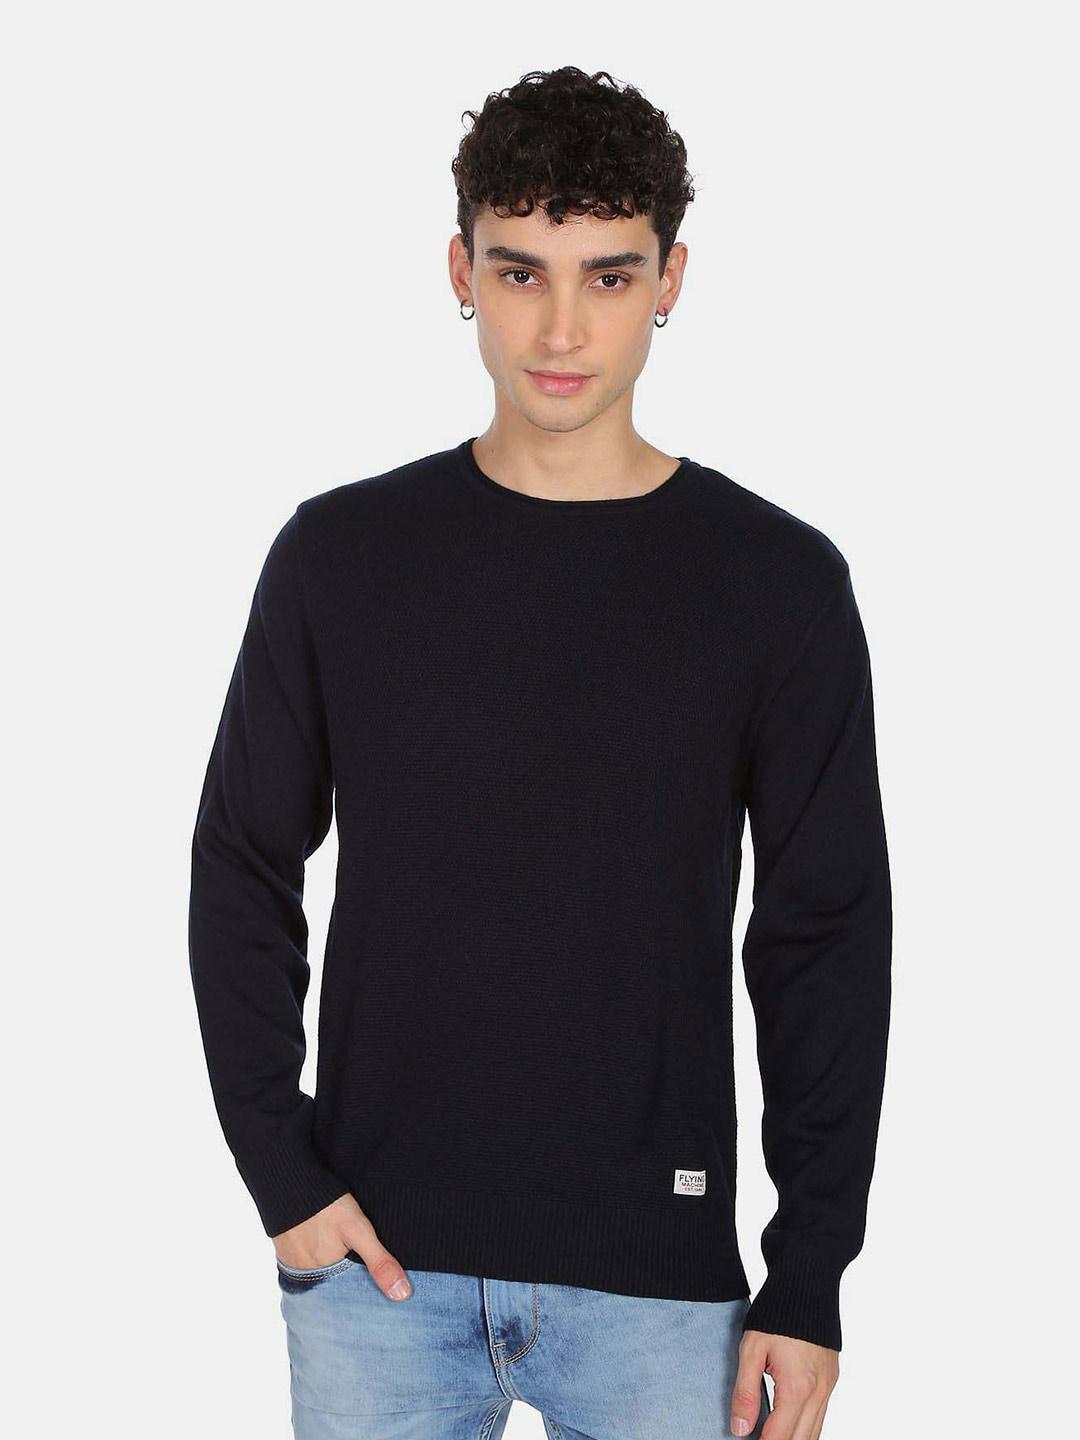 flying-machine-round-neck-long-sleeves-cotton-pullover